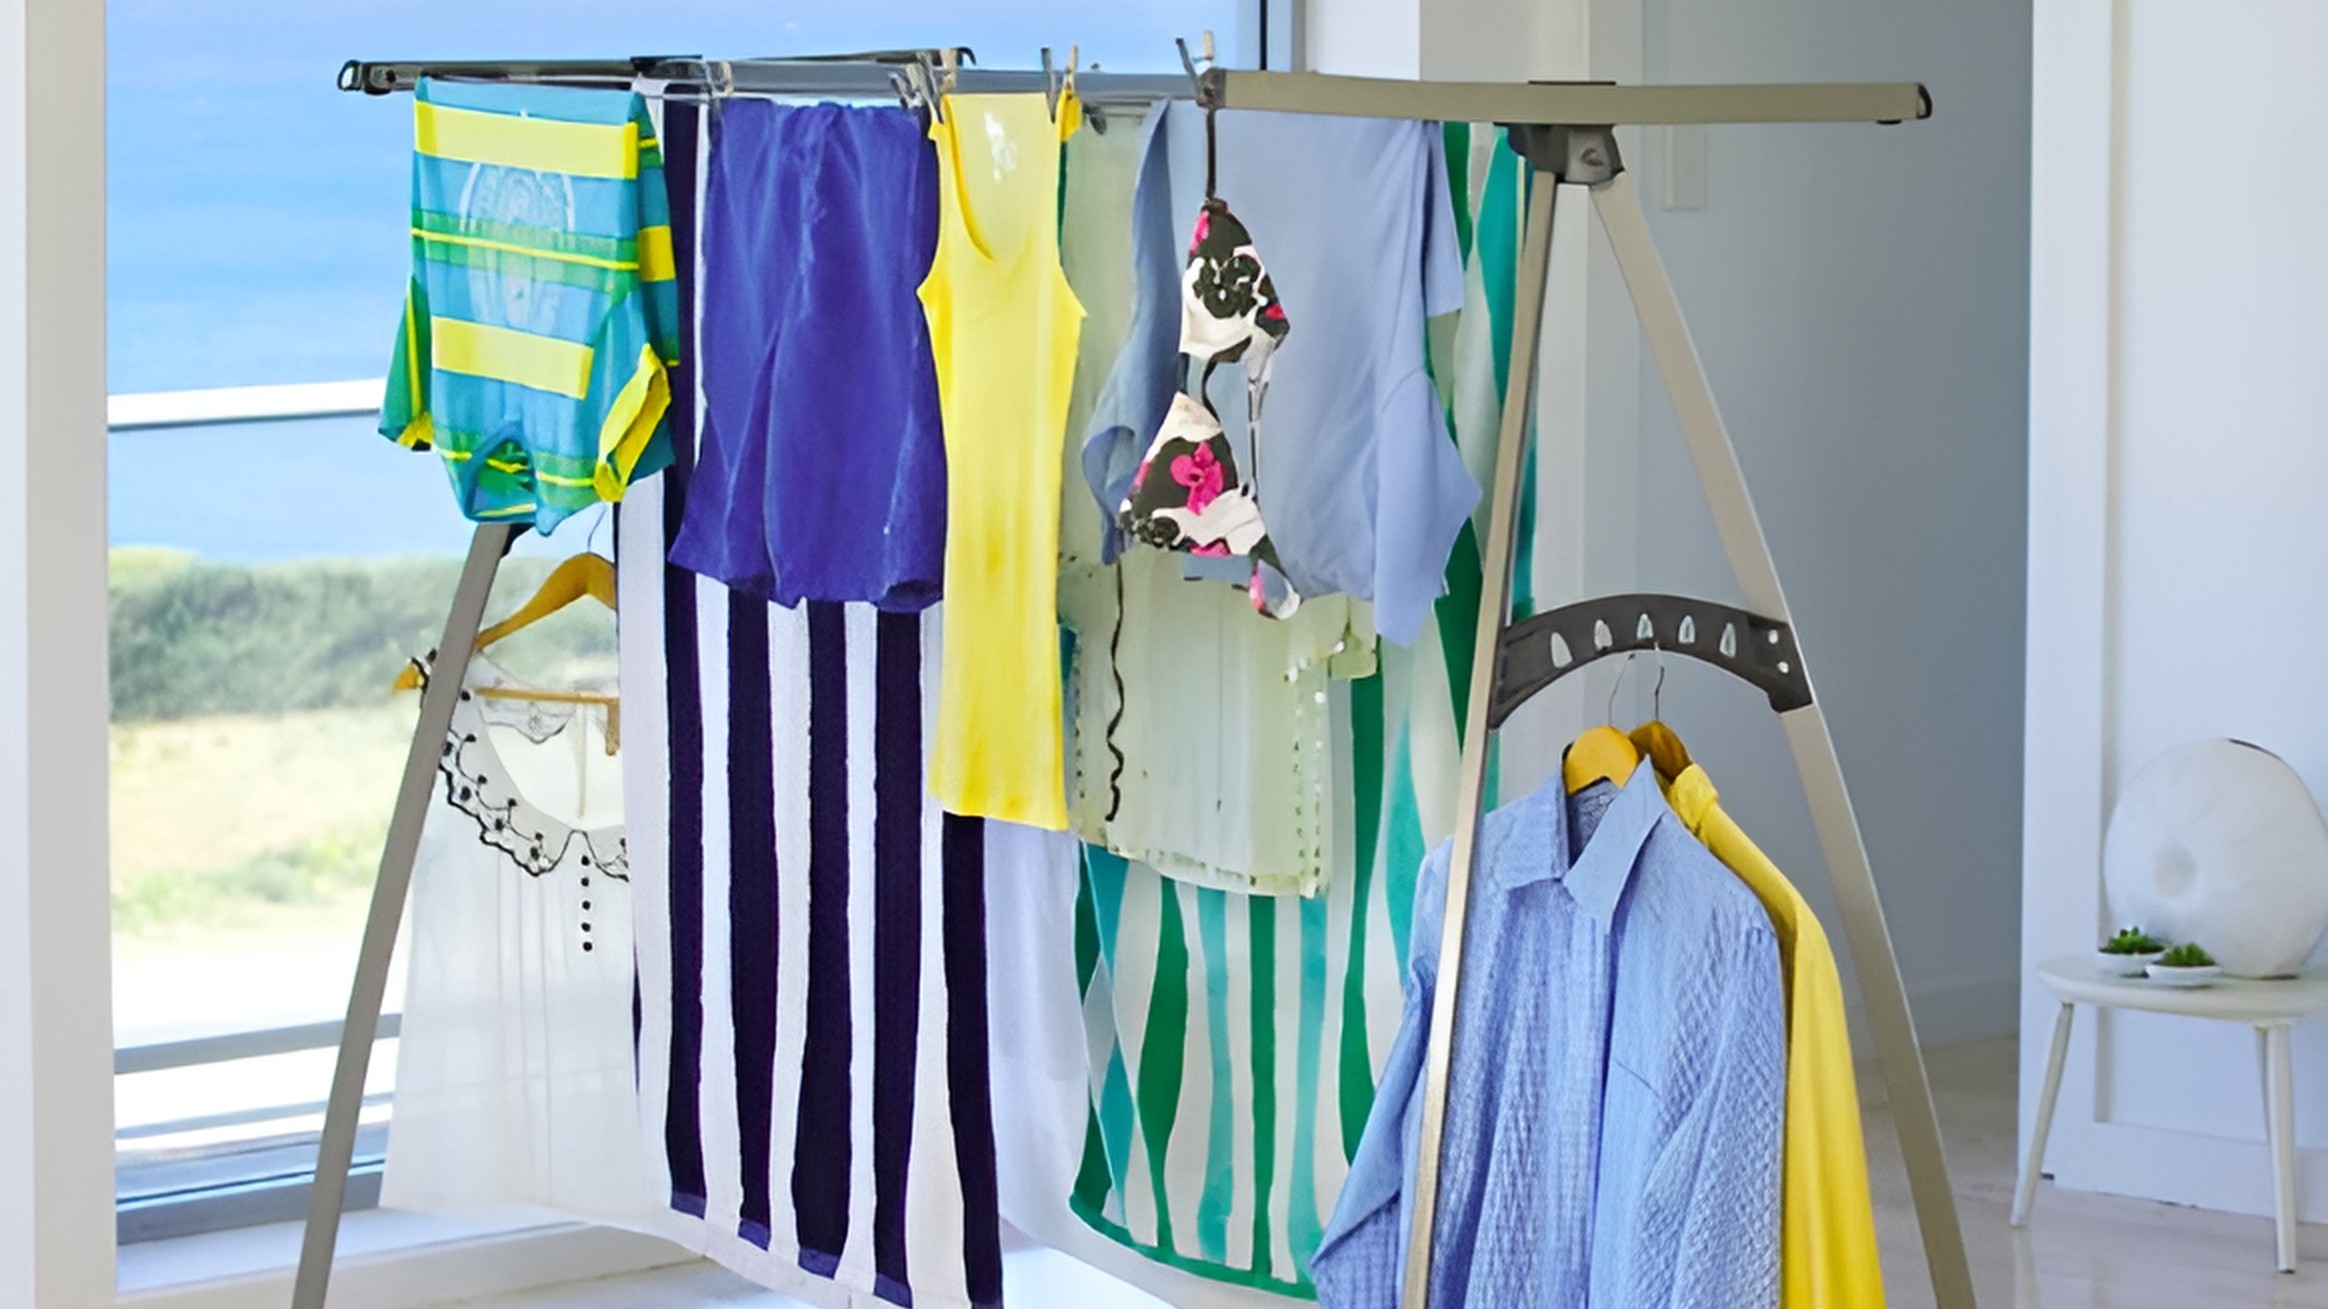 Clothesline Ideas for Small Spaces Why These Clotheslines Suit Me and My Needs?